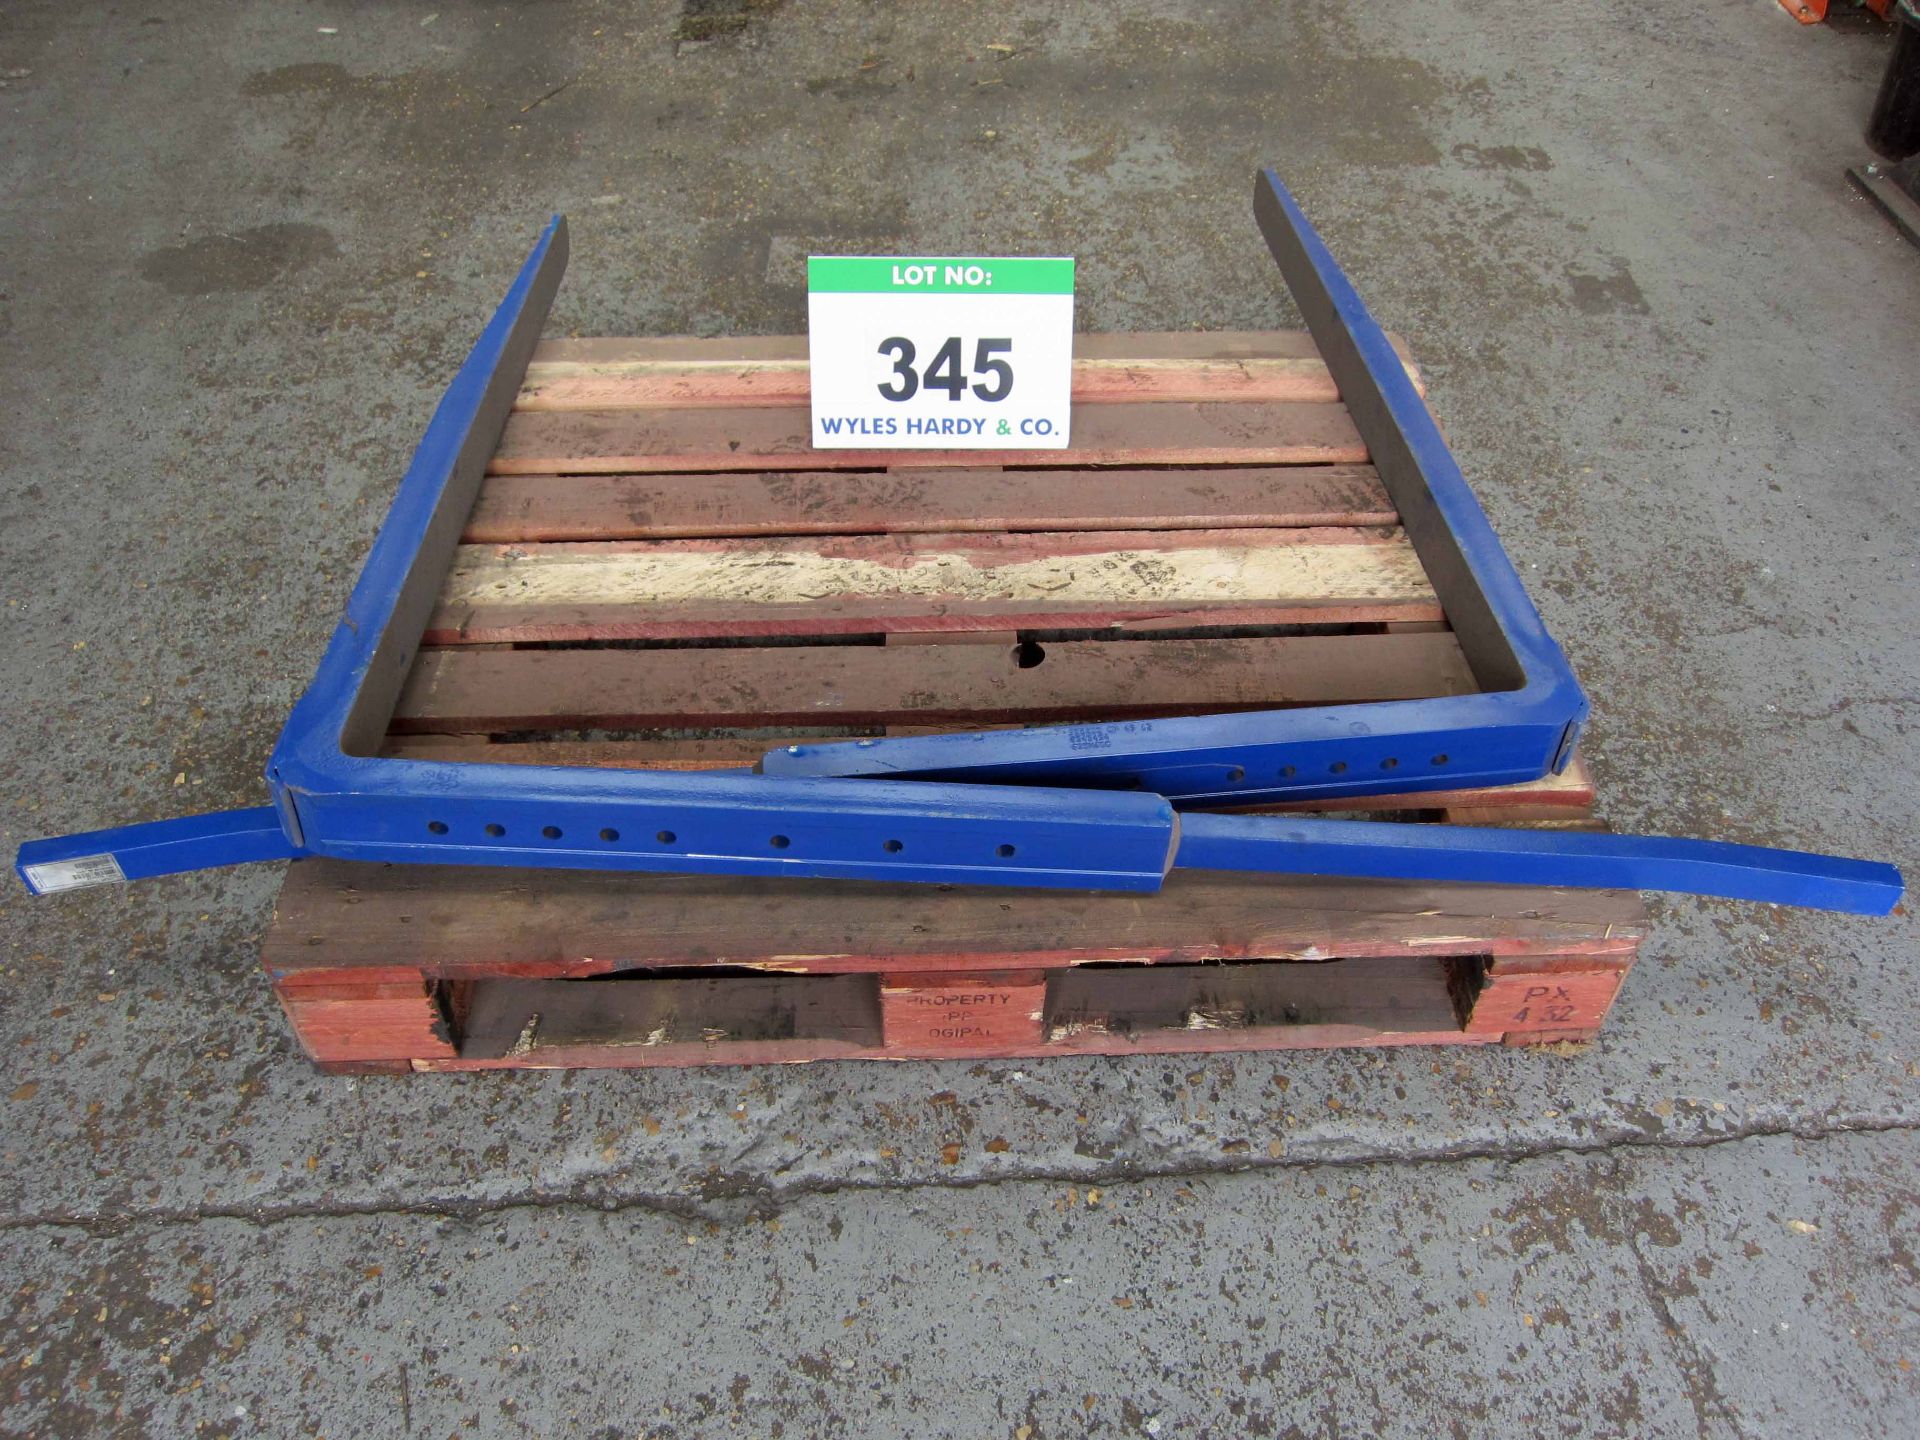 A Pair of CASCADE 80mm x 45mm x 1100mm Double Pallet Handler Forks, P/N 6243424, capacity 625Kg at